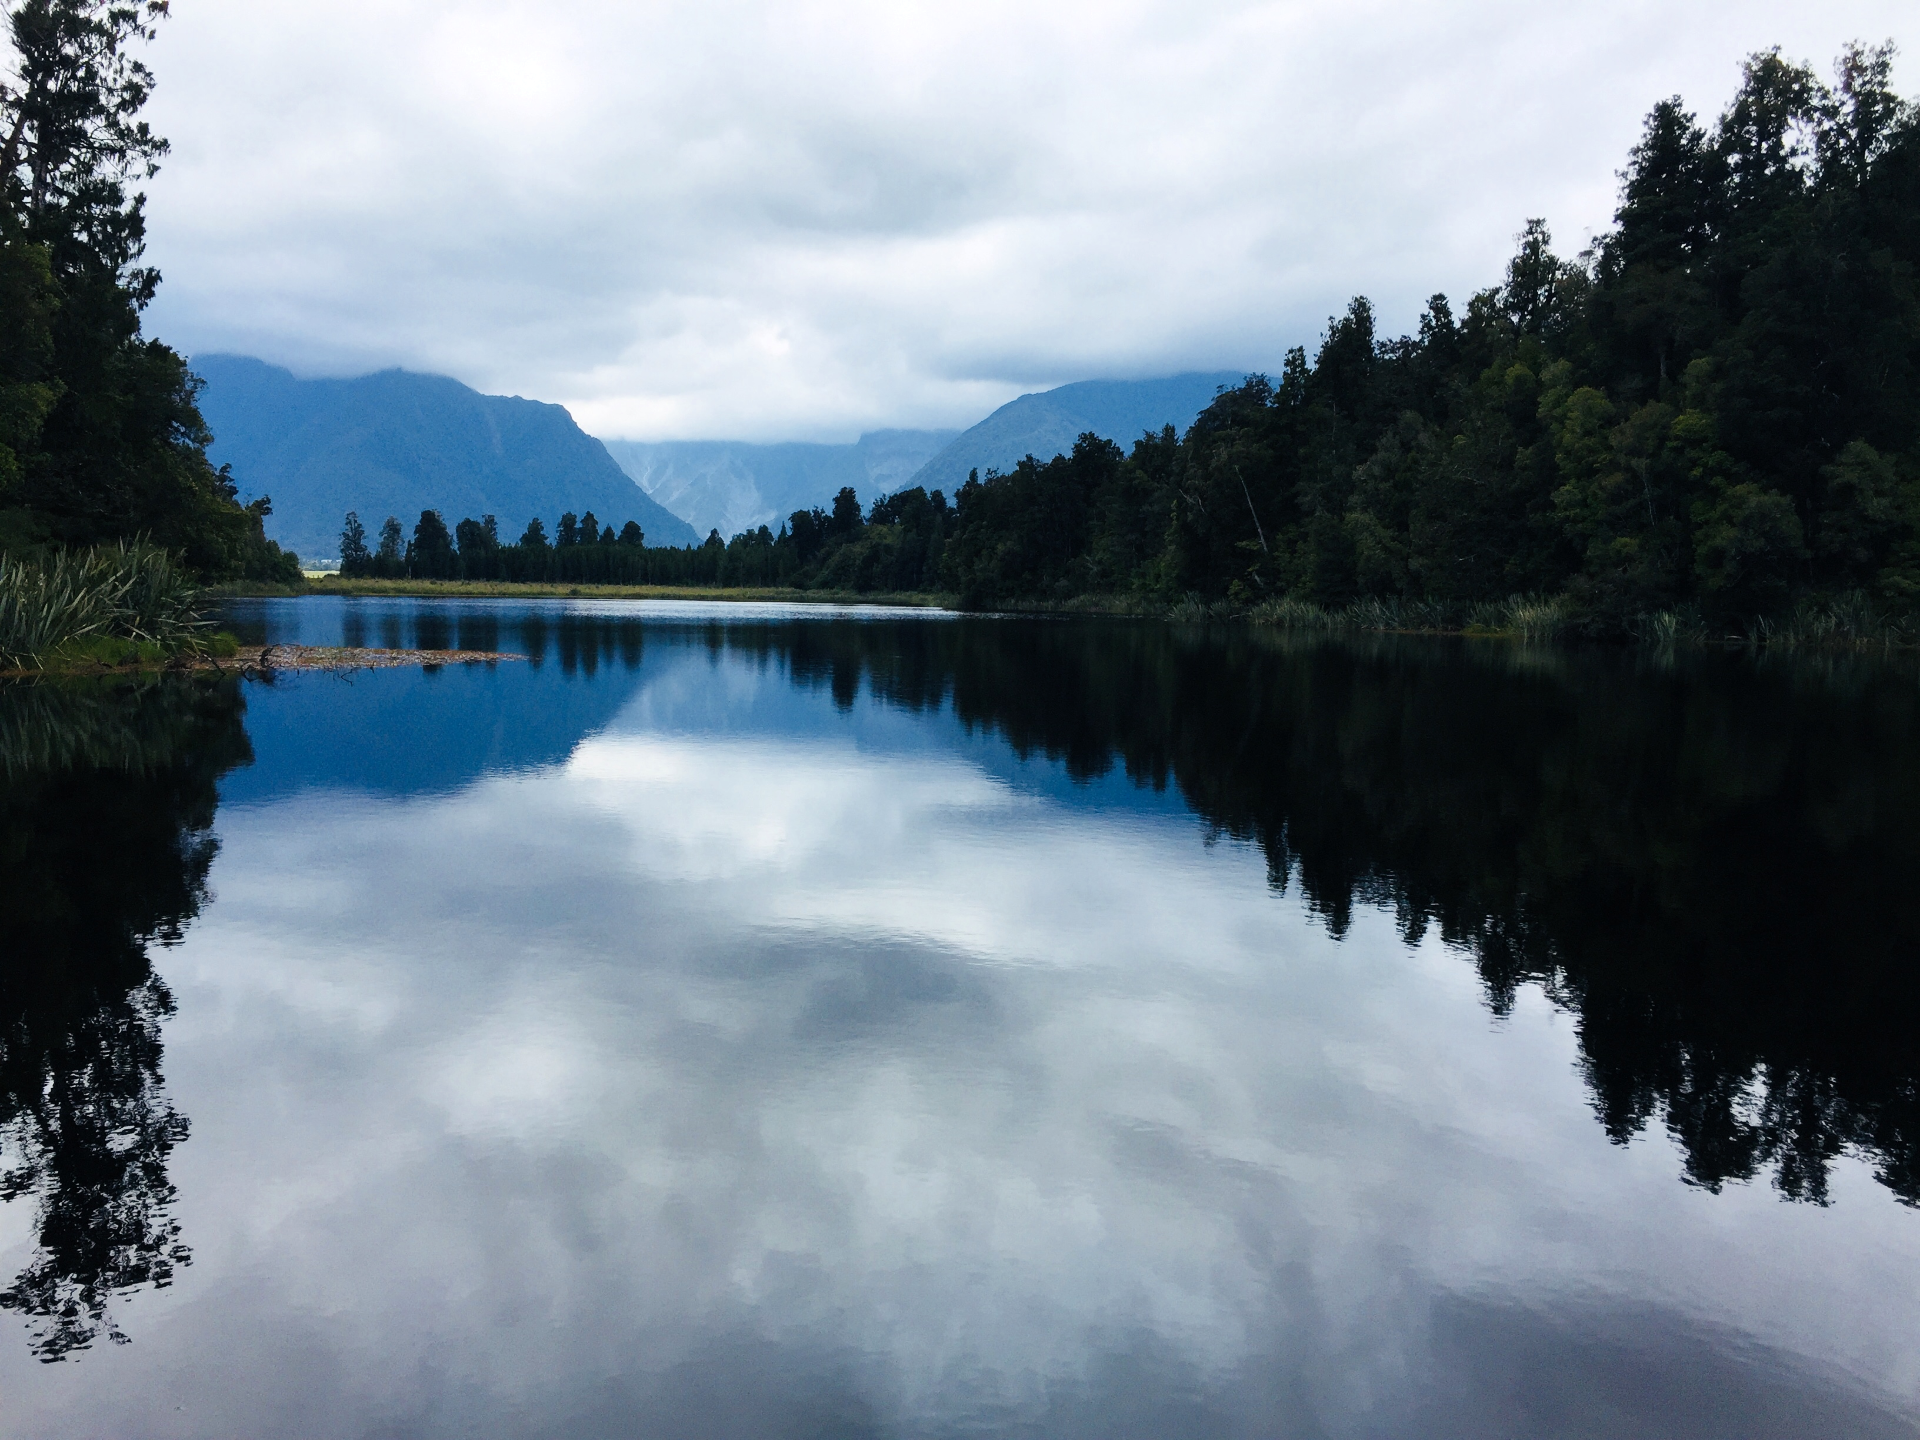 We visited Lake Matheson - weather changes here quickly!